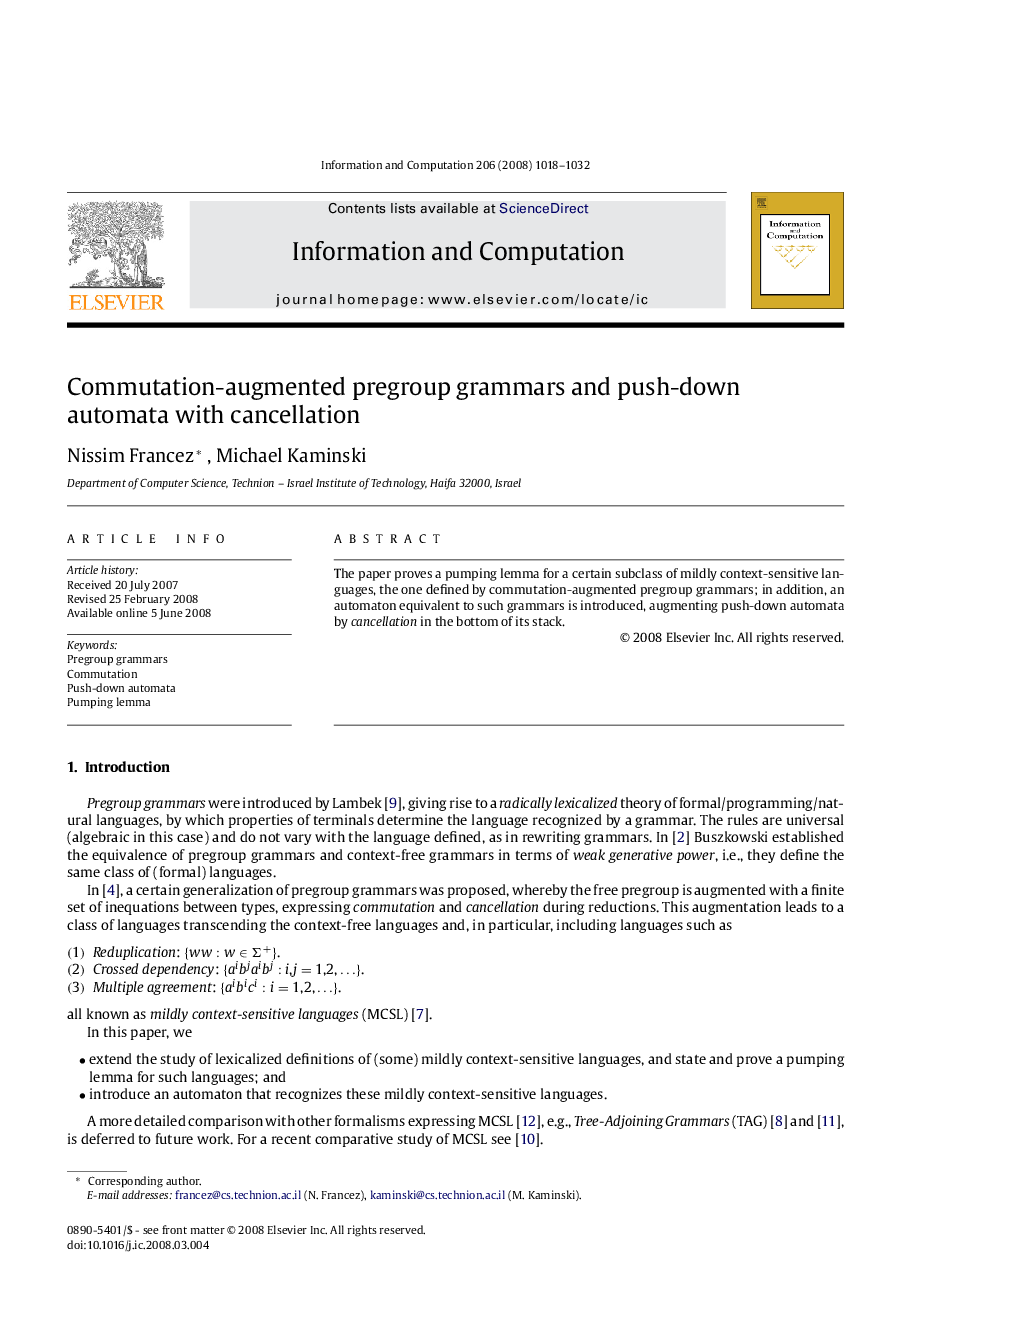 Commutation-augmented pregroup grammars and push-down automata with cancellation